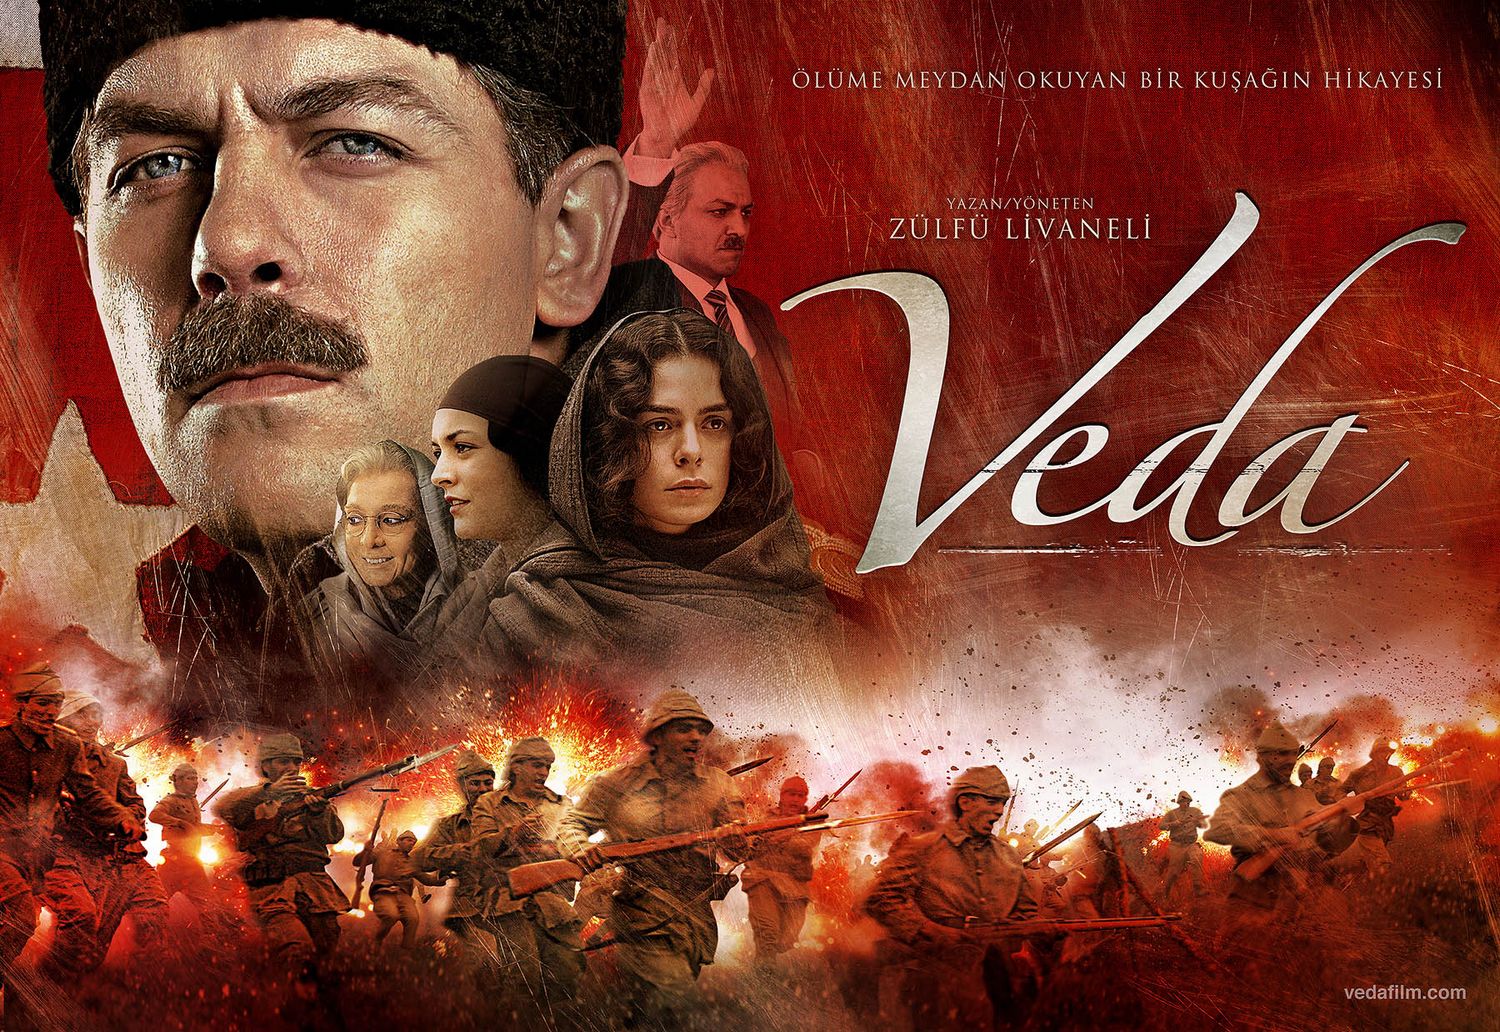 Extra Large Movie Poster Image for Veda (#2 of 5)